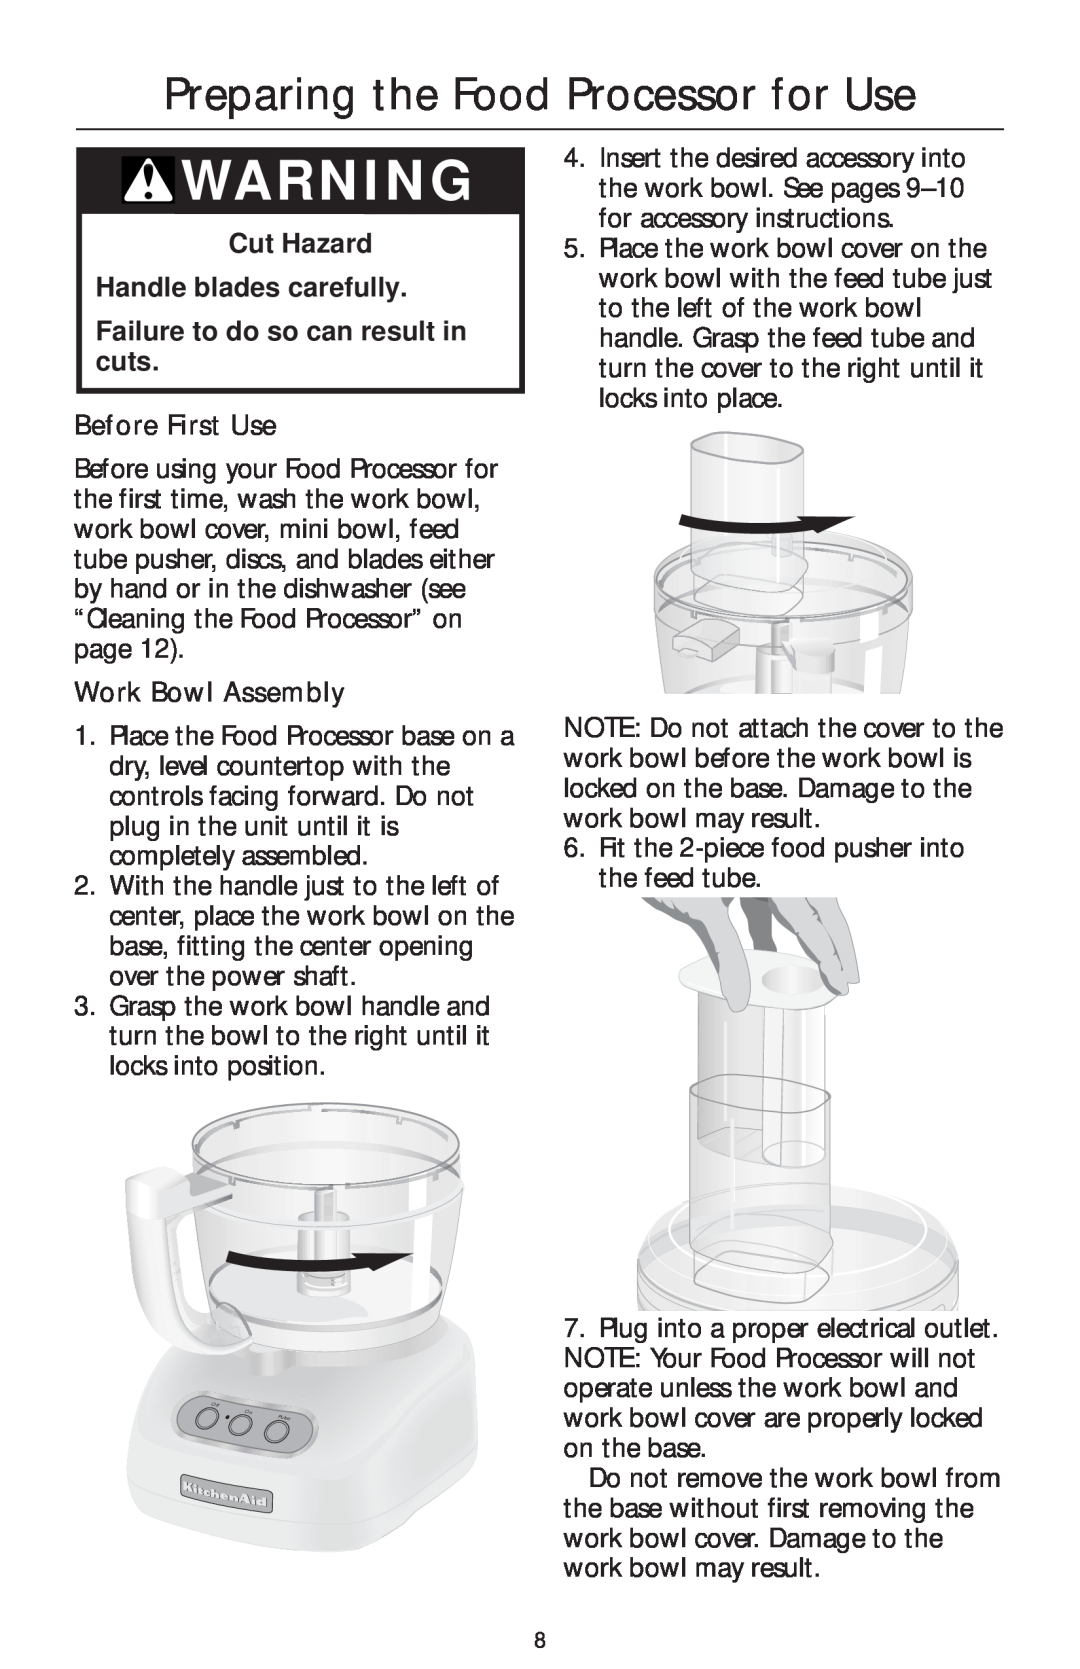 KitchenAid 4KFP750 manual Preparing the Food Processor for Use, Cut Hazard Handle blades carefully, Before First Use 